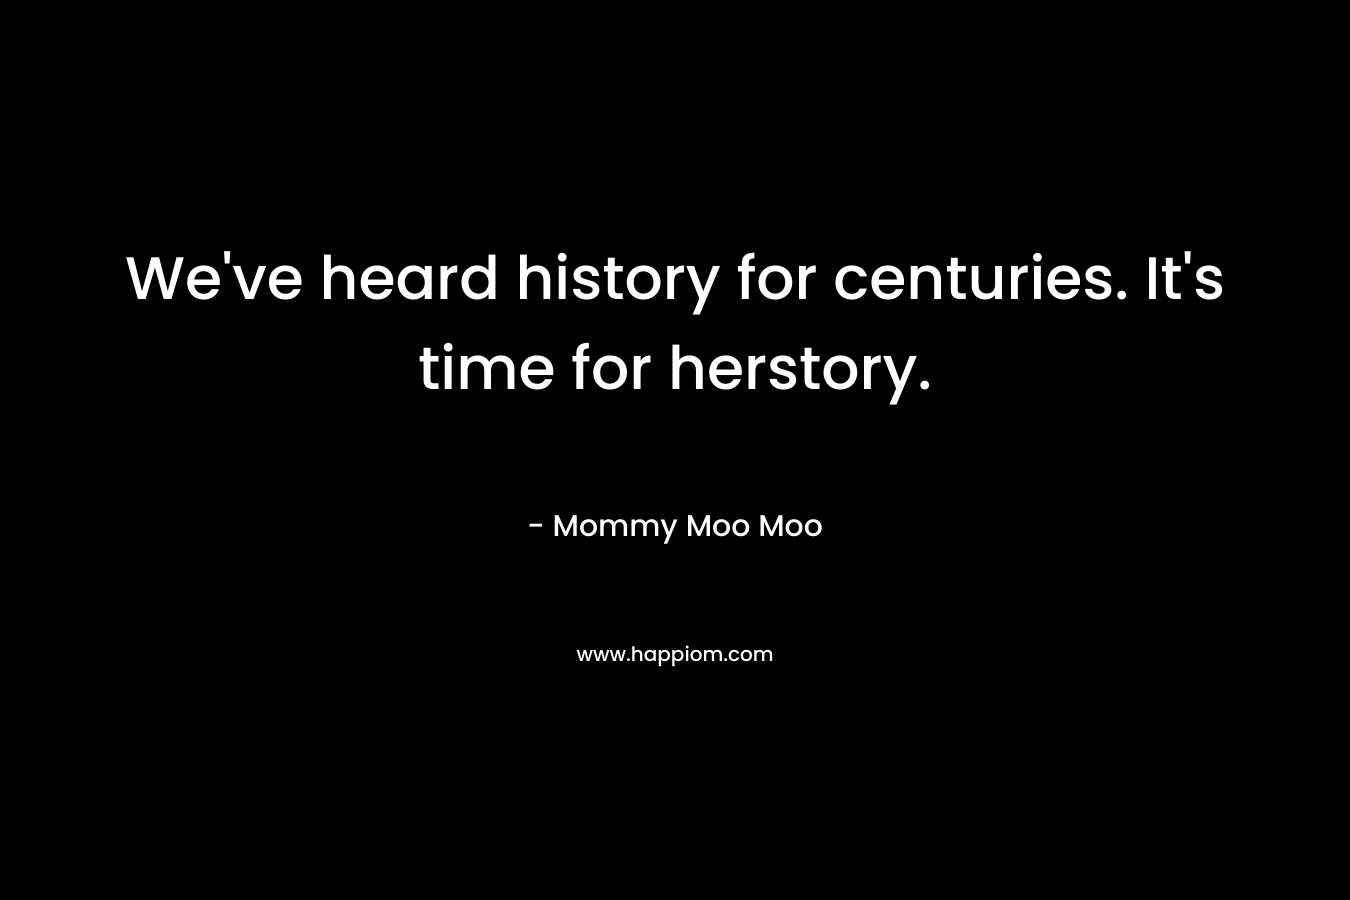 We’ve heard history for centuries. It’s time for herstory. – Mommy Moo Moo